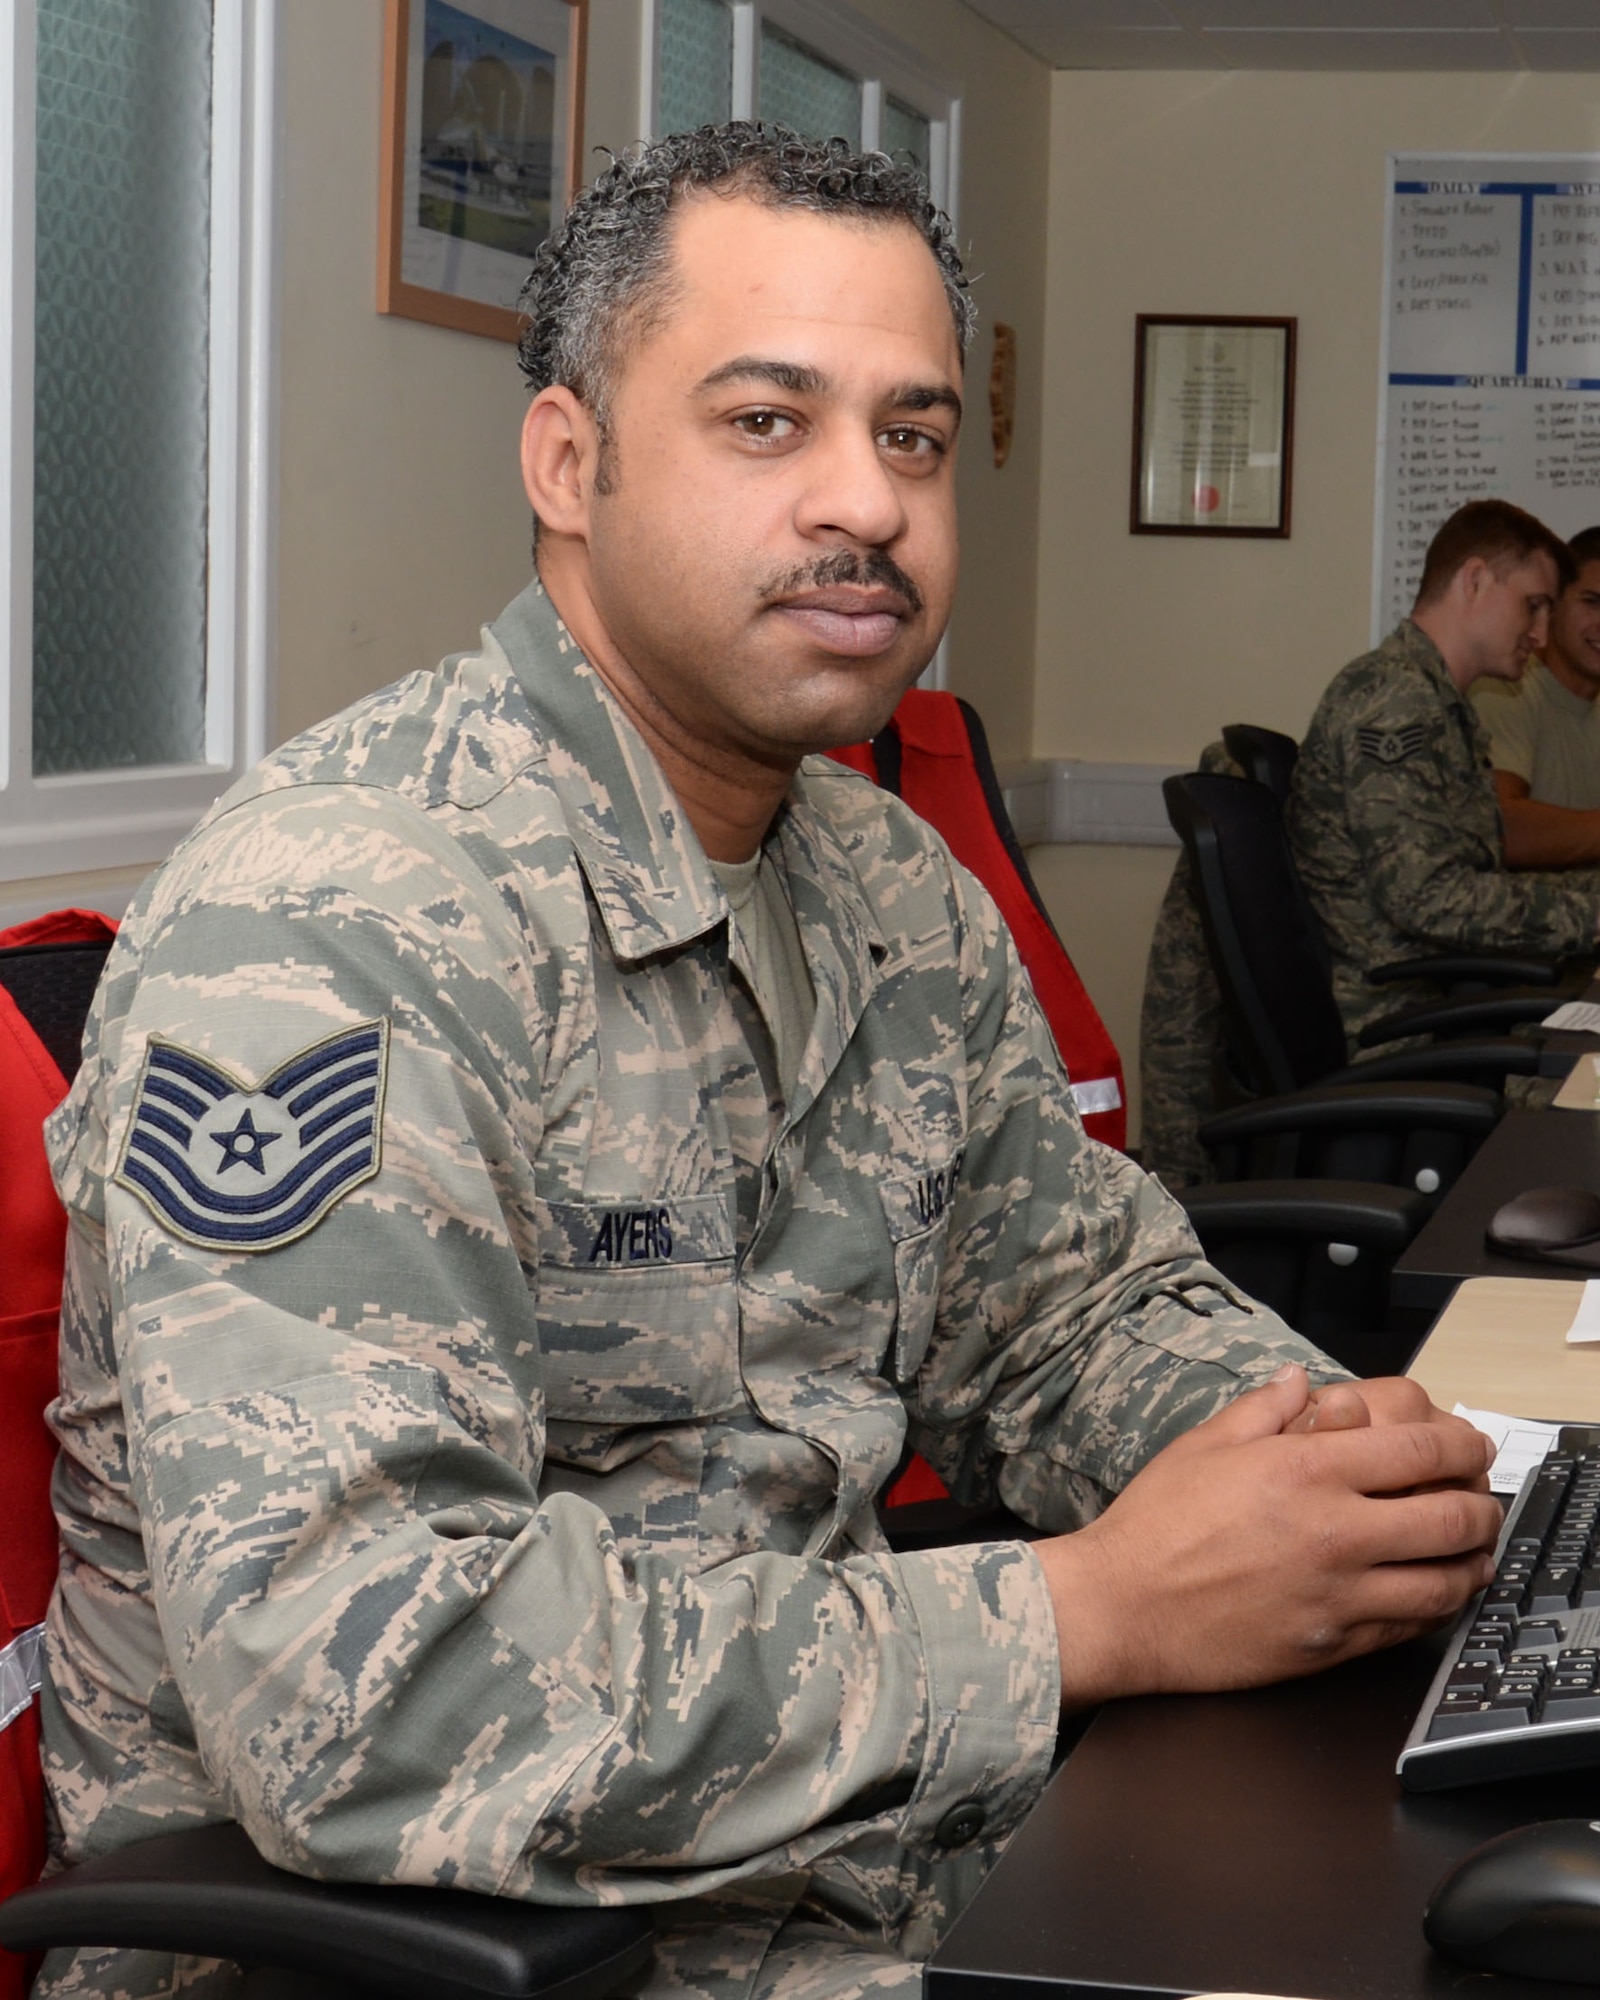 U.S. Air Force Tech. Sgt. Dury Ayers, 100th Logistics Readiness Squadron NCO in charge of deployment operations from Lackland Air Force Base, Texas, poses for a photograph July 21, 2015, on RAF Mildenhall, England. Ayers was nominated for the Square D Spotlight for portraying the core value of Service Before Self. (U.S. Air Force photo by Gina Randall/Released)